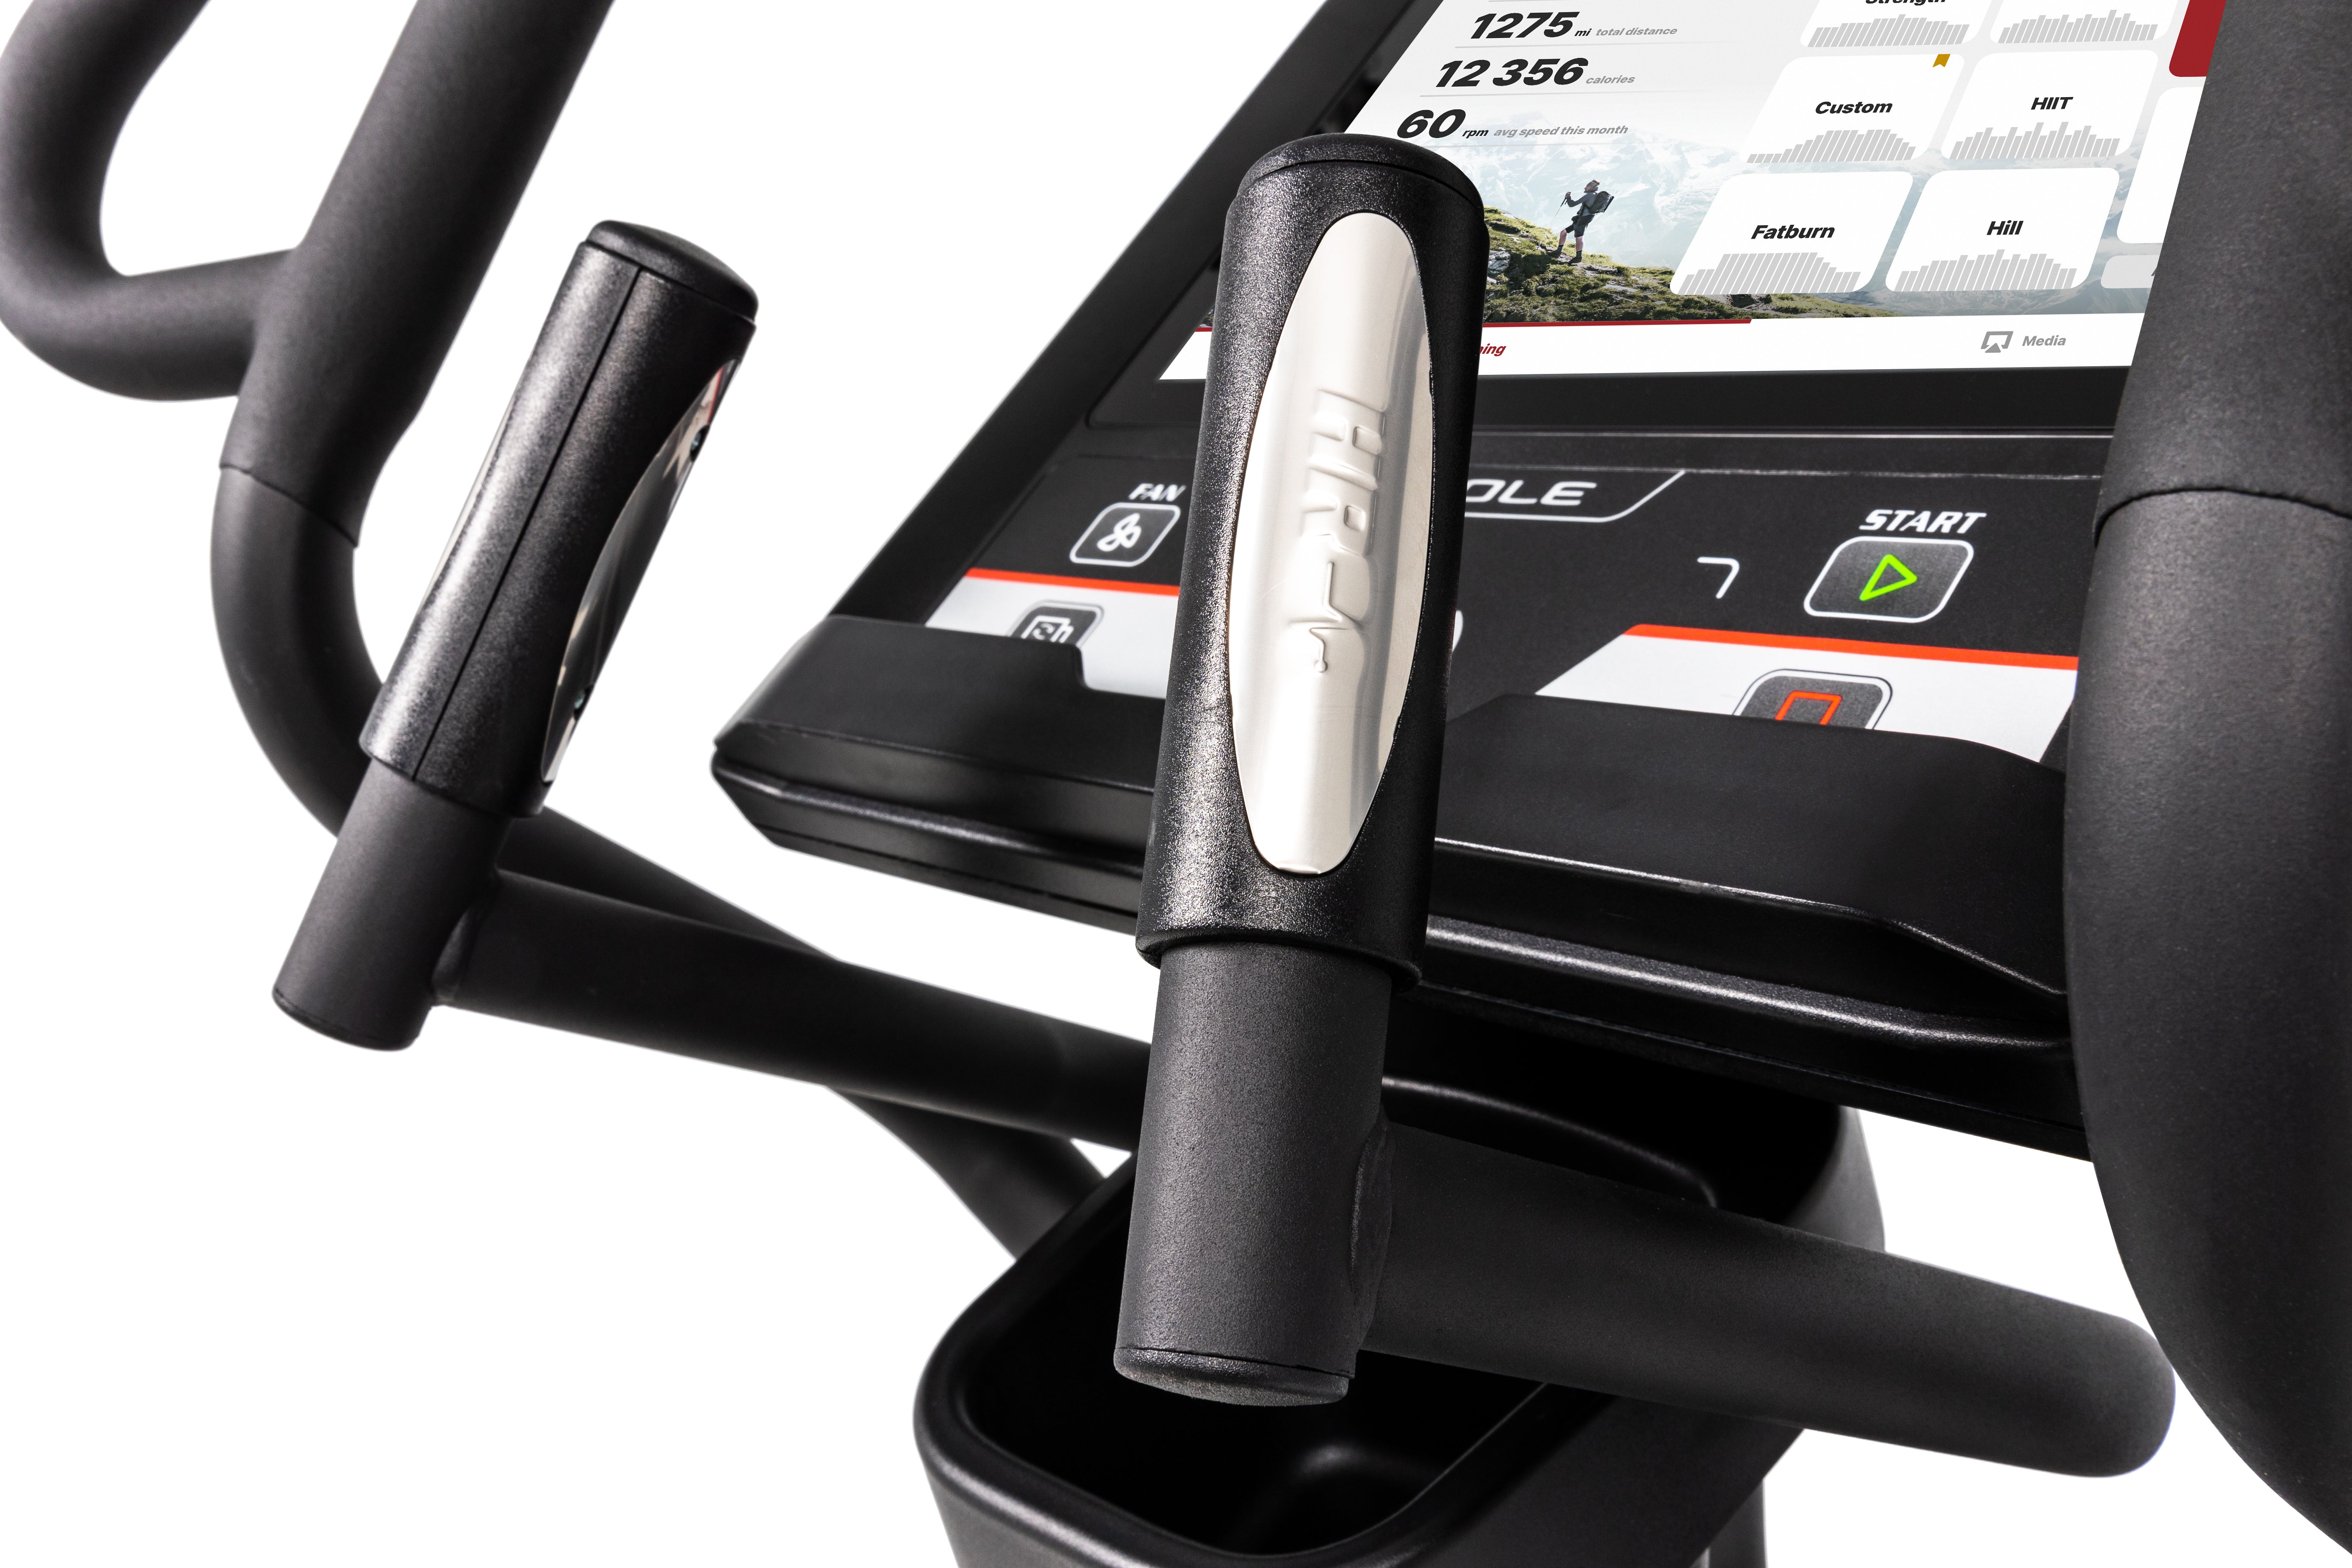 Close-up of the Sole E95 elliptical trainer's console and handlebars. The digital console displays workout metrics such as heart rate, distance, and time. Handlebars feature ergonomic grips and control buttons. The overall color scheme is black with touches of gray and white.